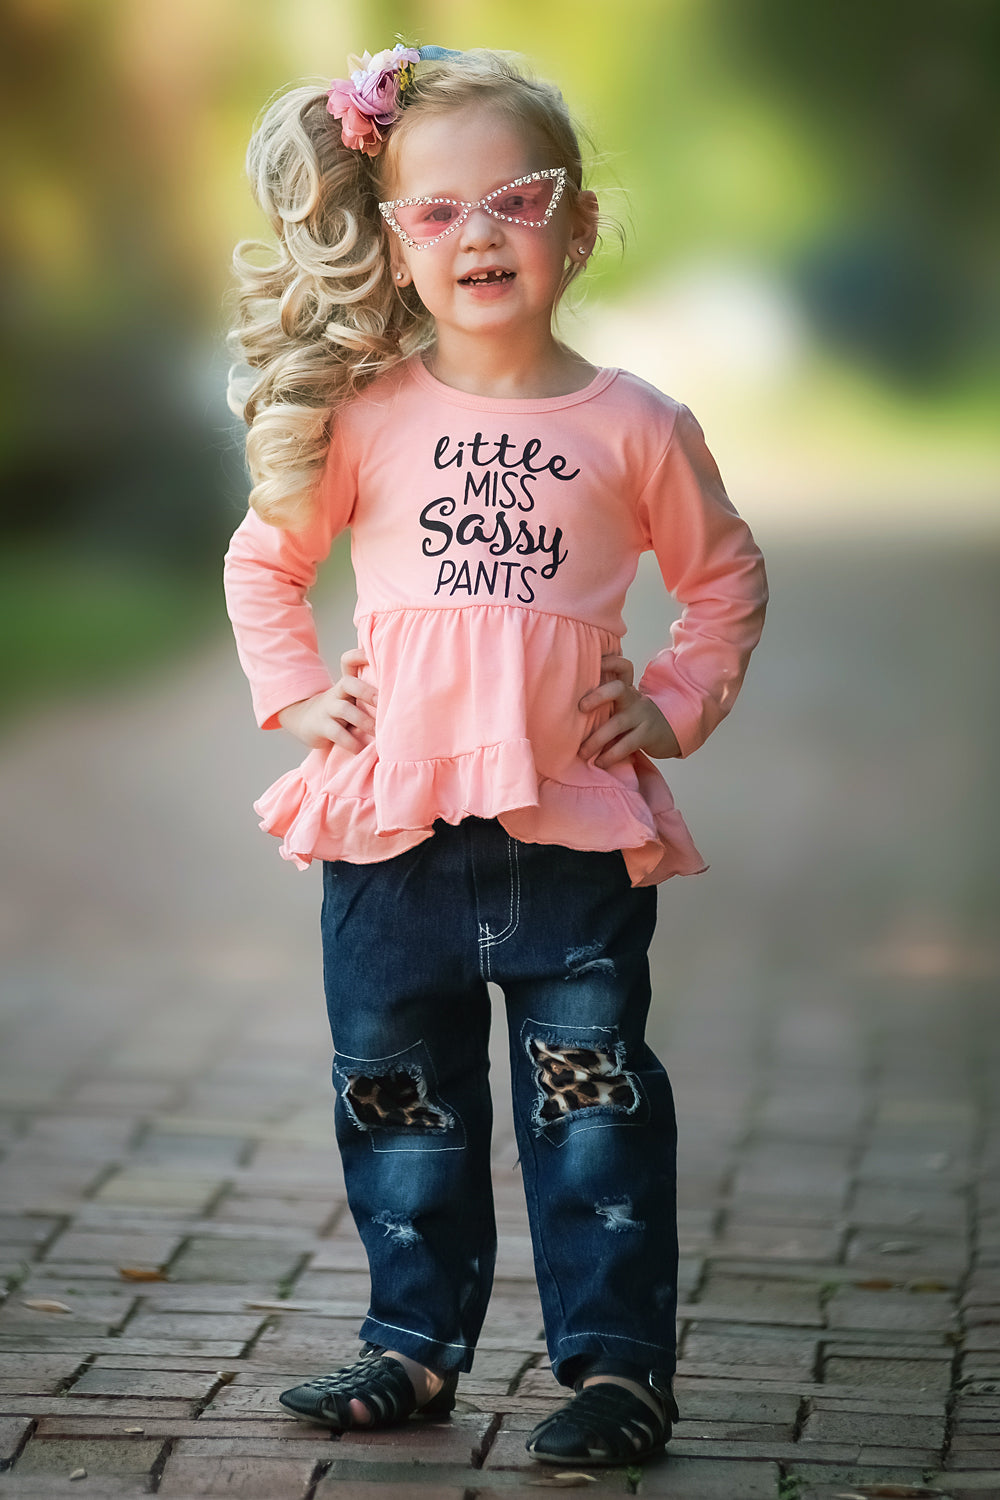 GIRLS - Miss Sassy Pants Top and Jeans Set - Hannah Rose Vintage Boutique